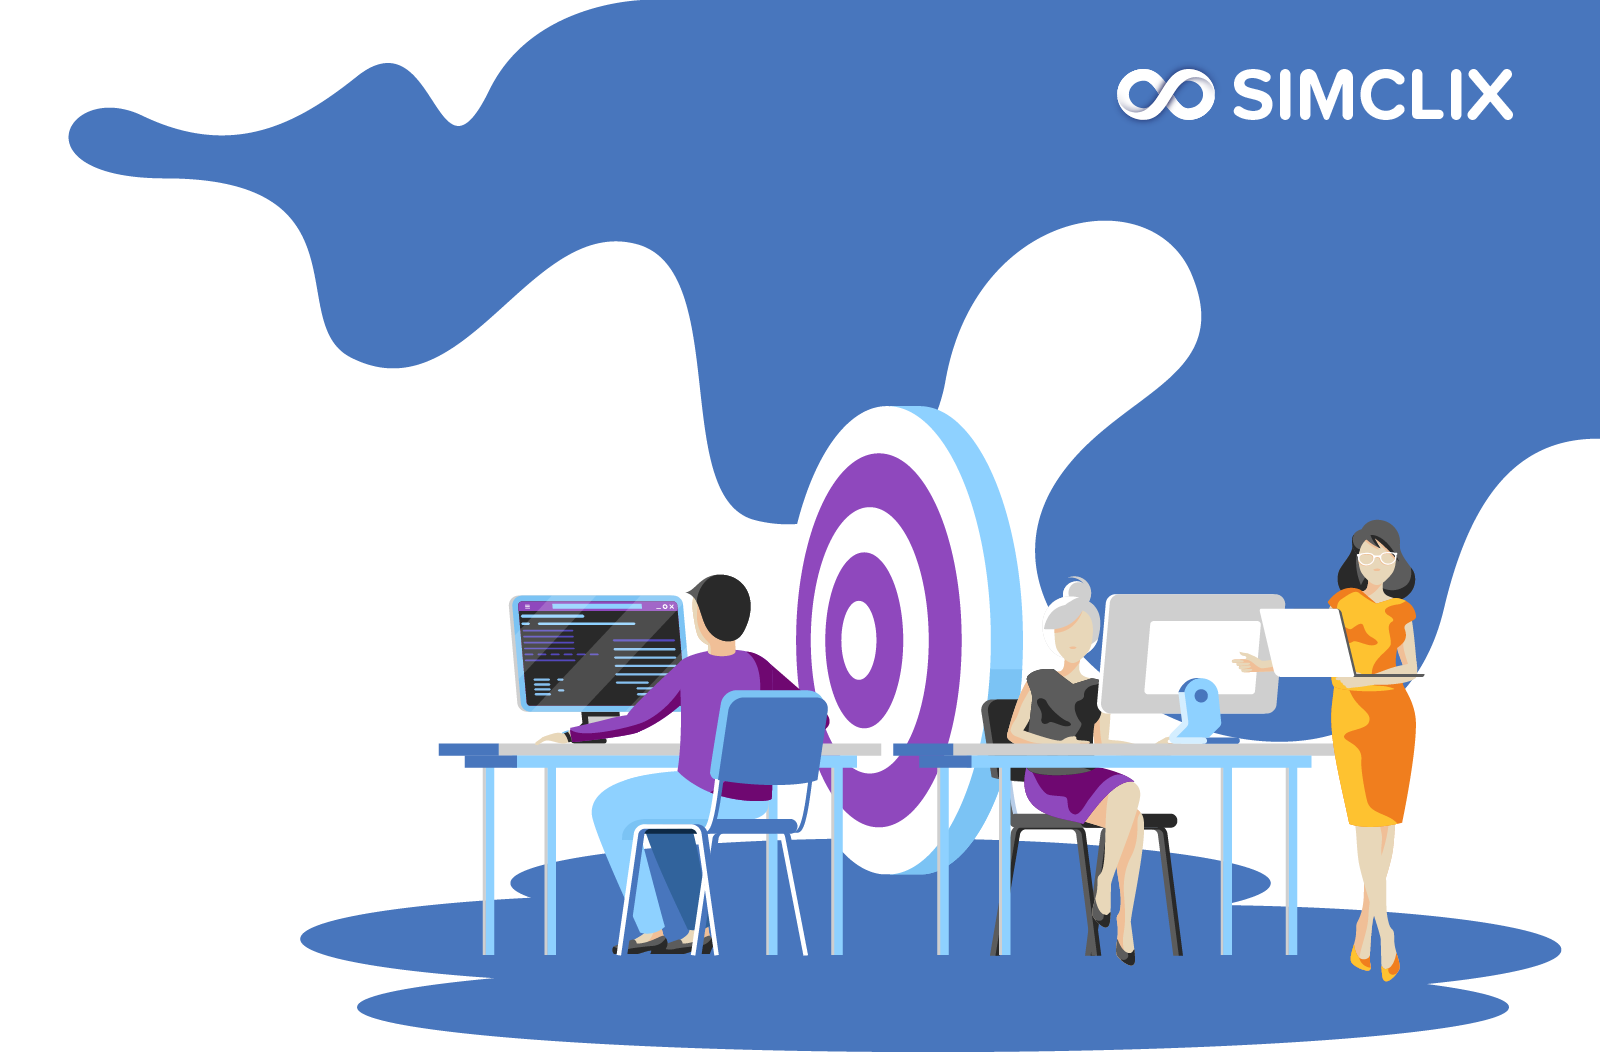 About Simclix